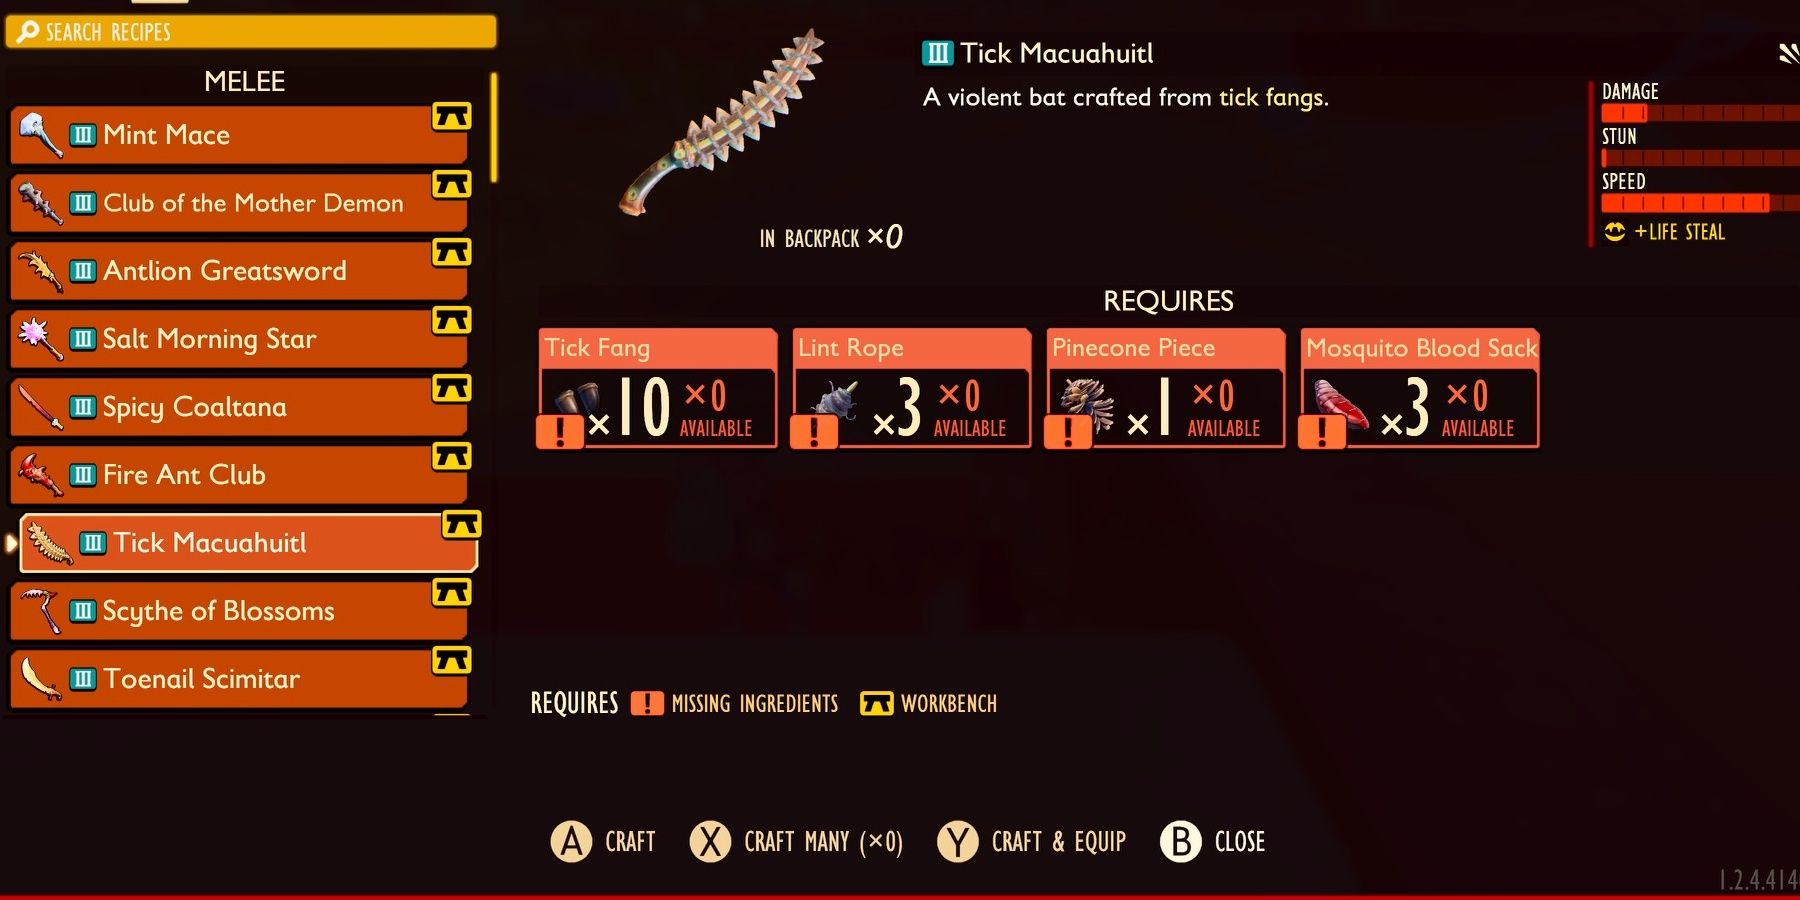 The Tick Macuahuitl and its crafting requirements in Grounded.